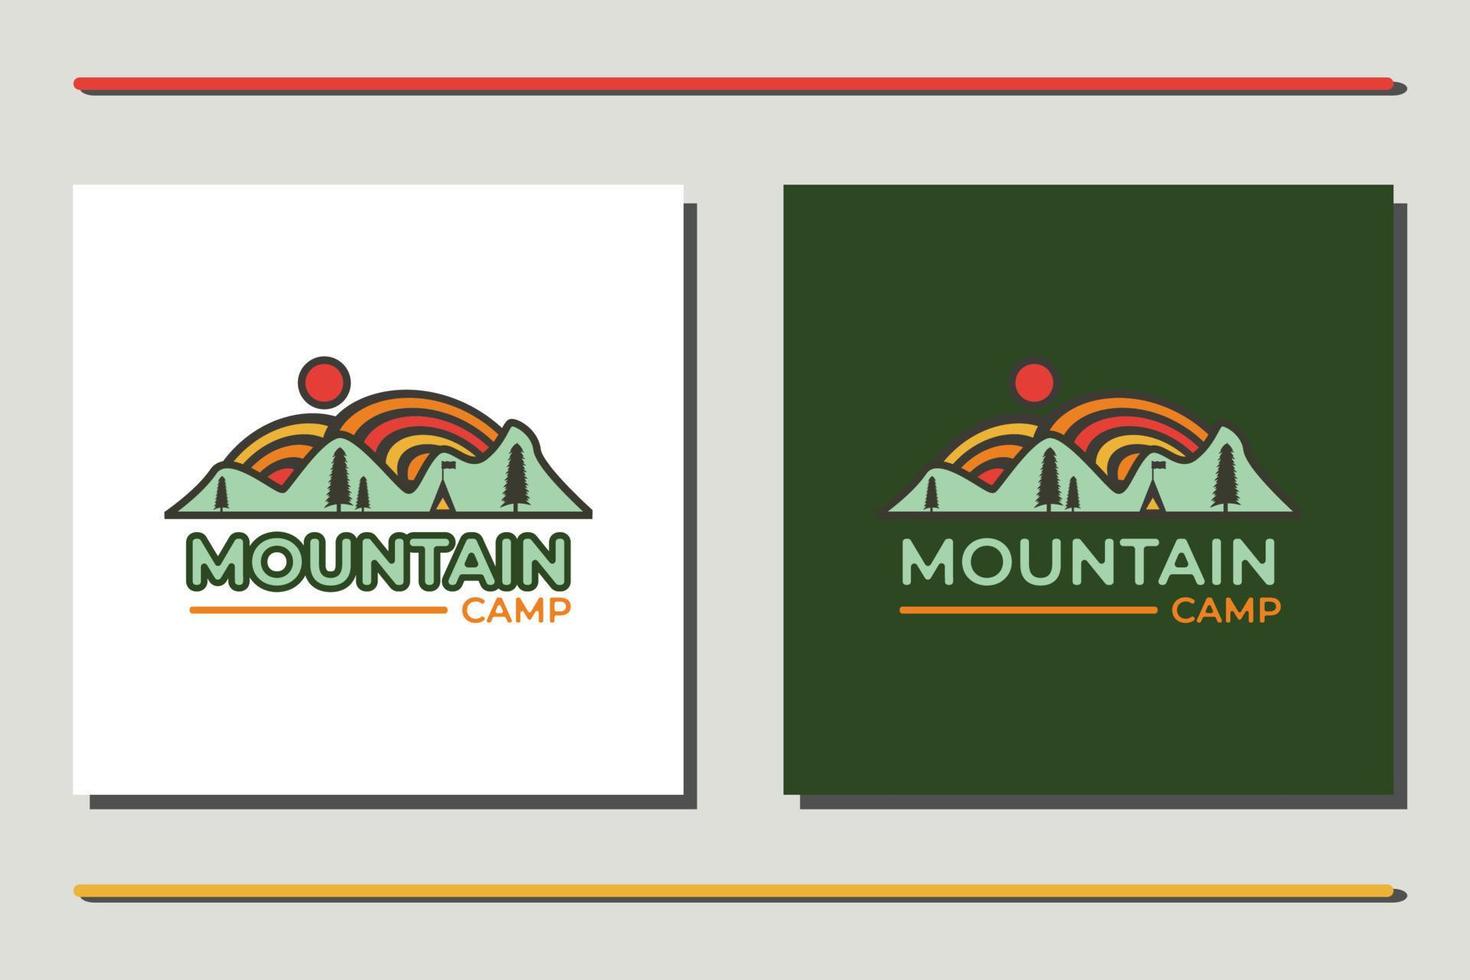 Camp and Sun for Hipster Adventure logo design vector